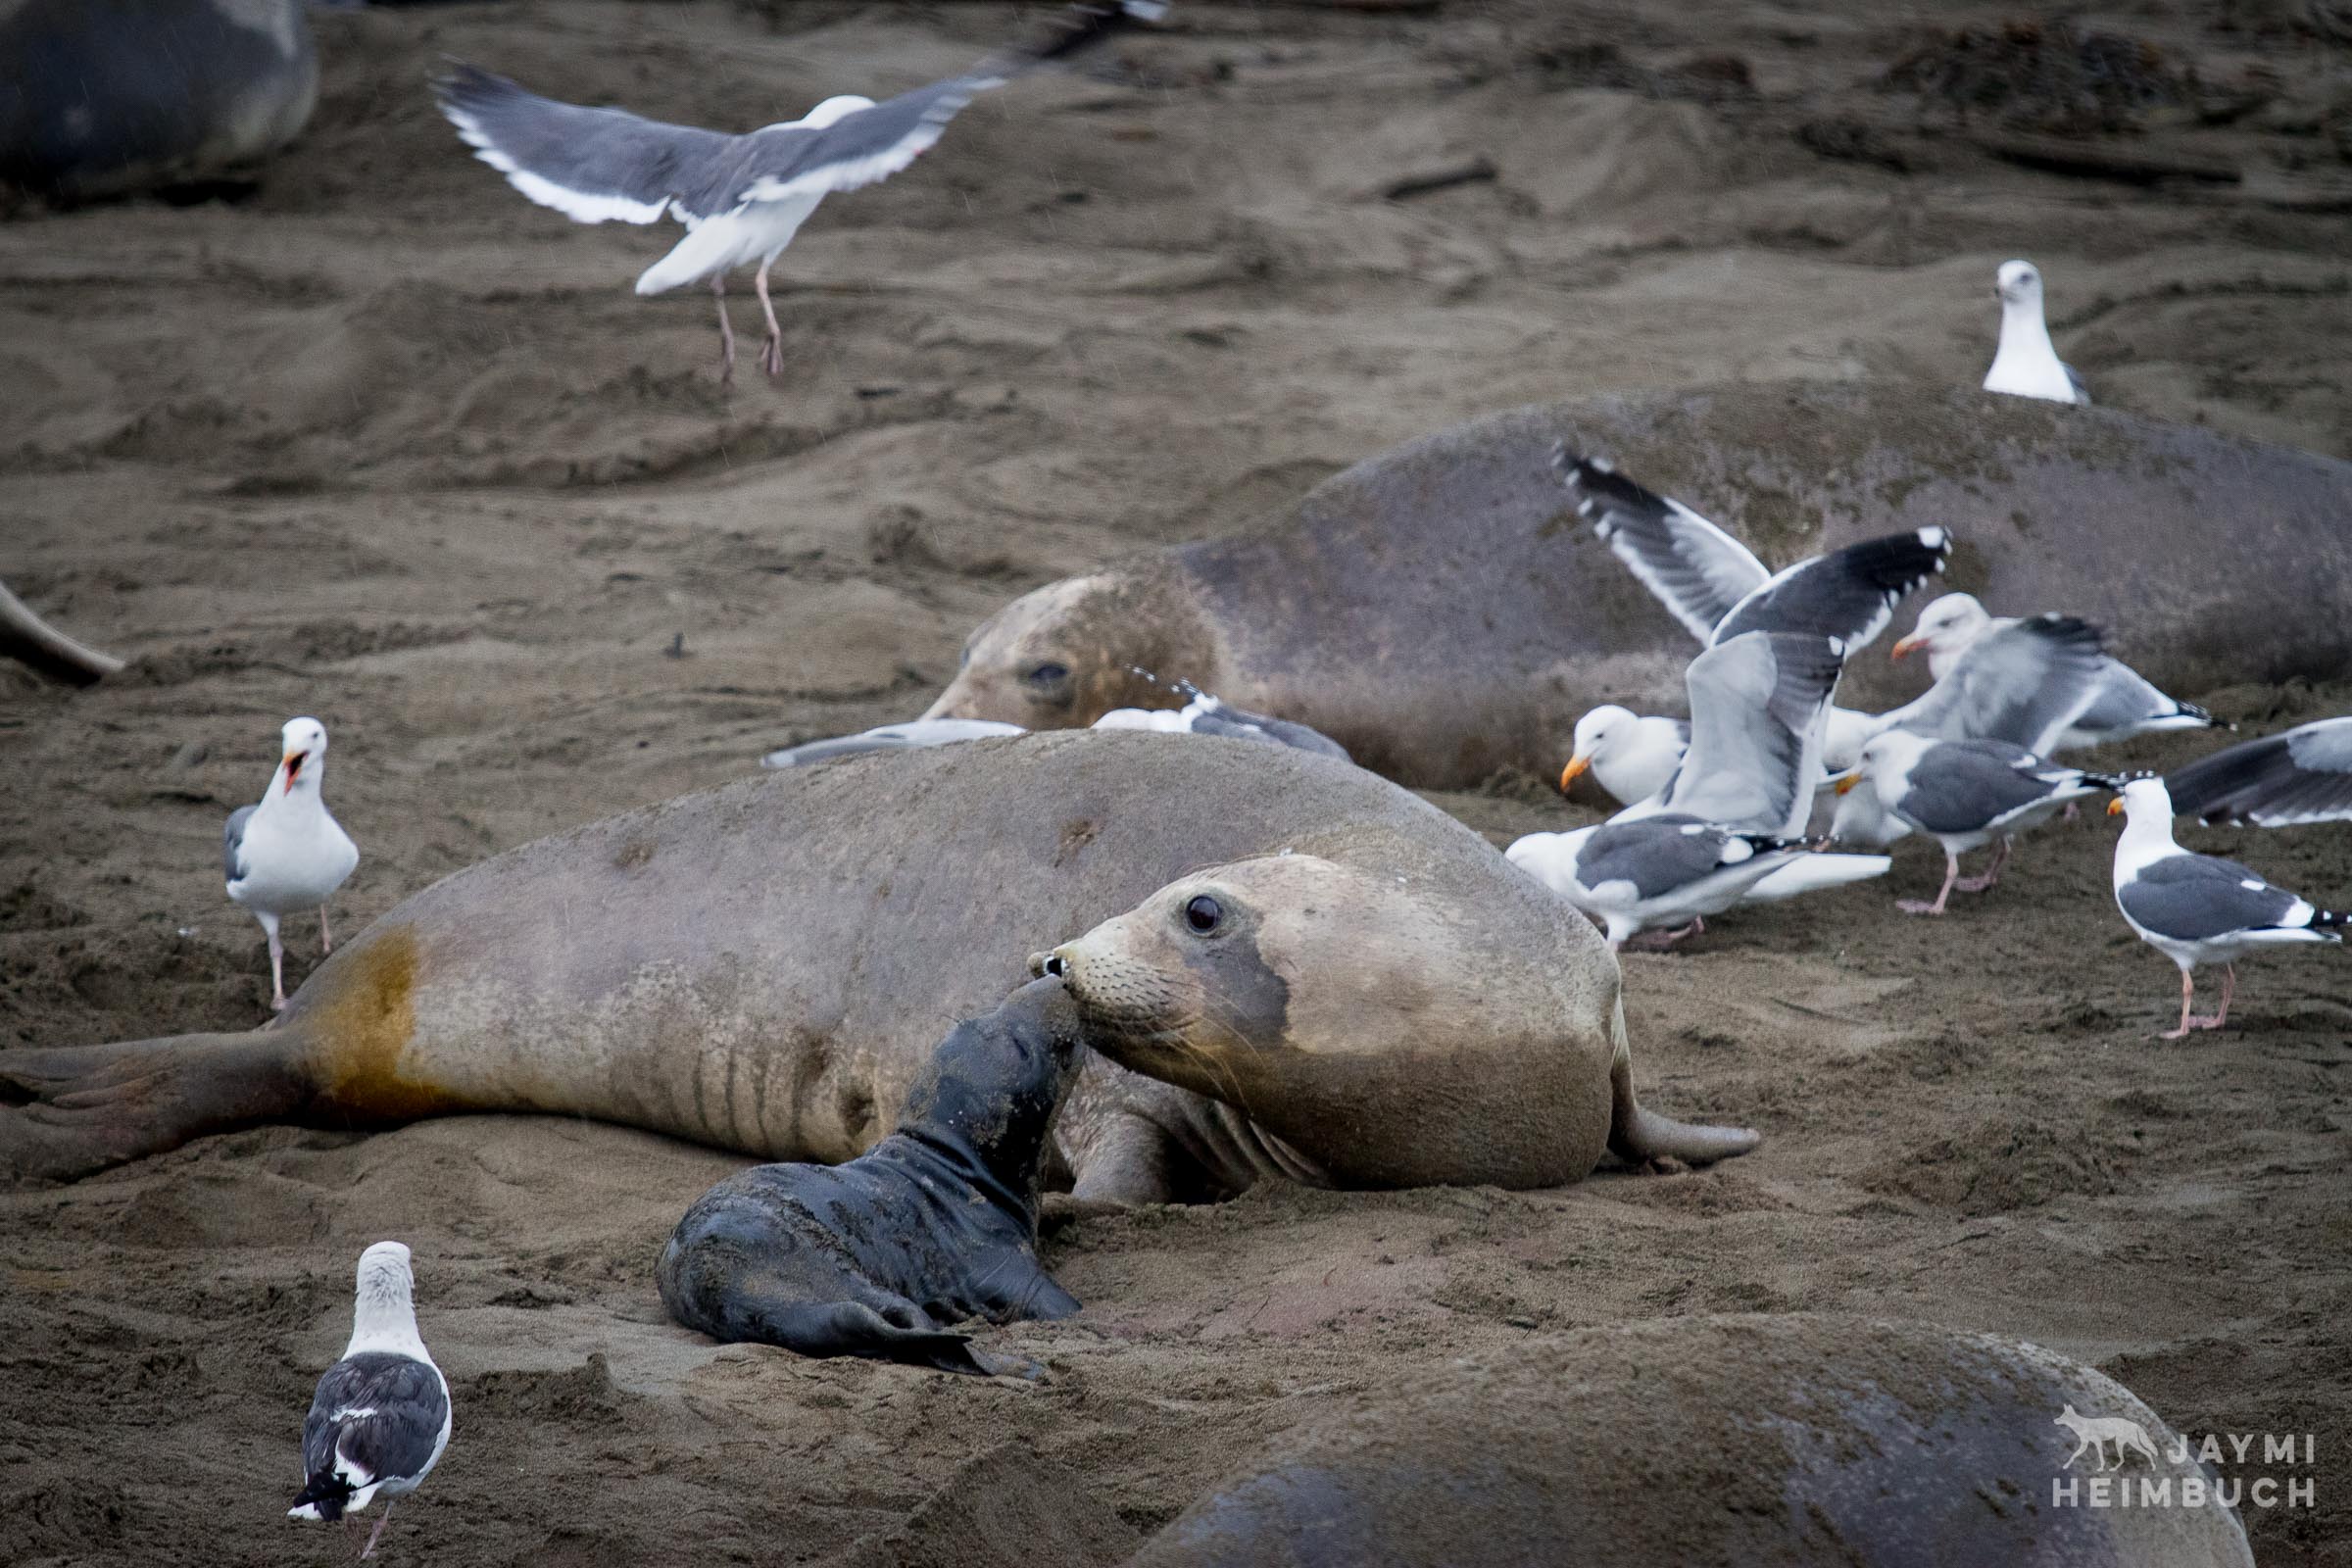 A female northern elephant seal (Mirounga angustirostris) inspects her pup after just giving birth